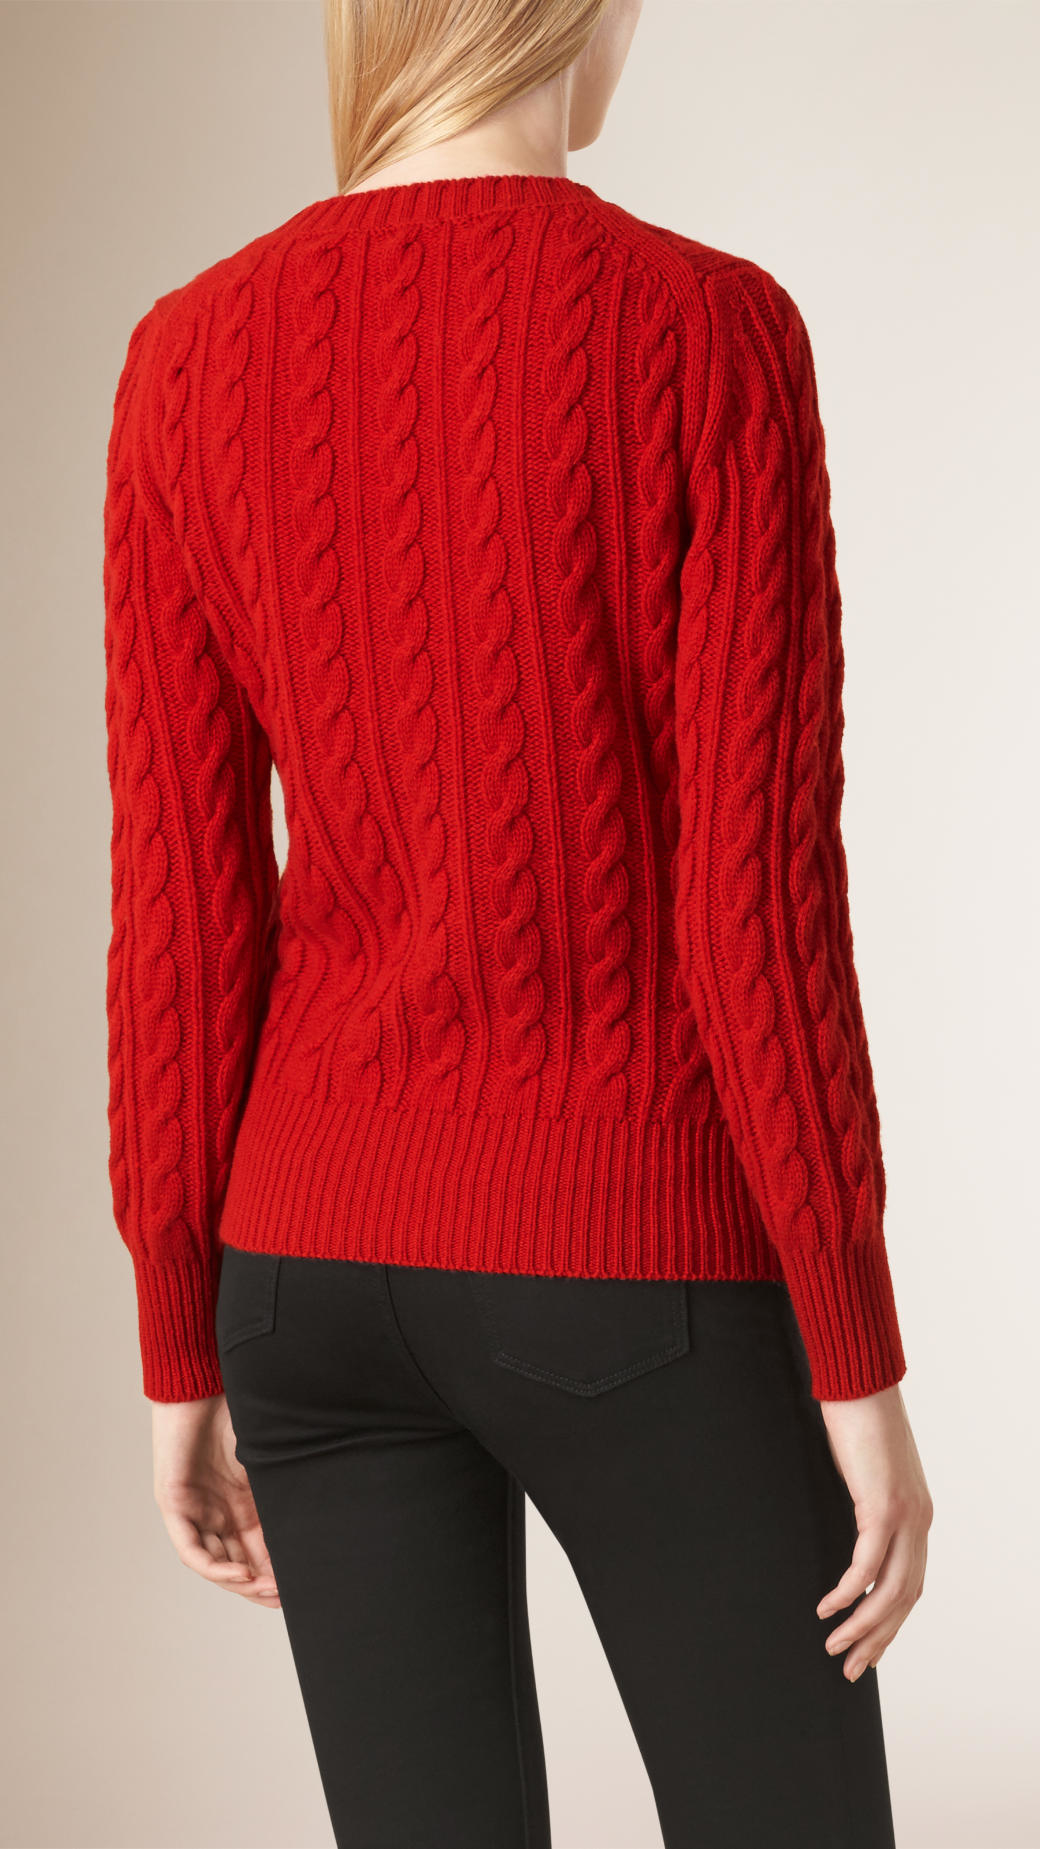 Lyst - Burberry Cable Knit Wool Cashmere Sweater Parade Red in Red